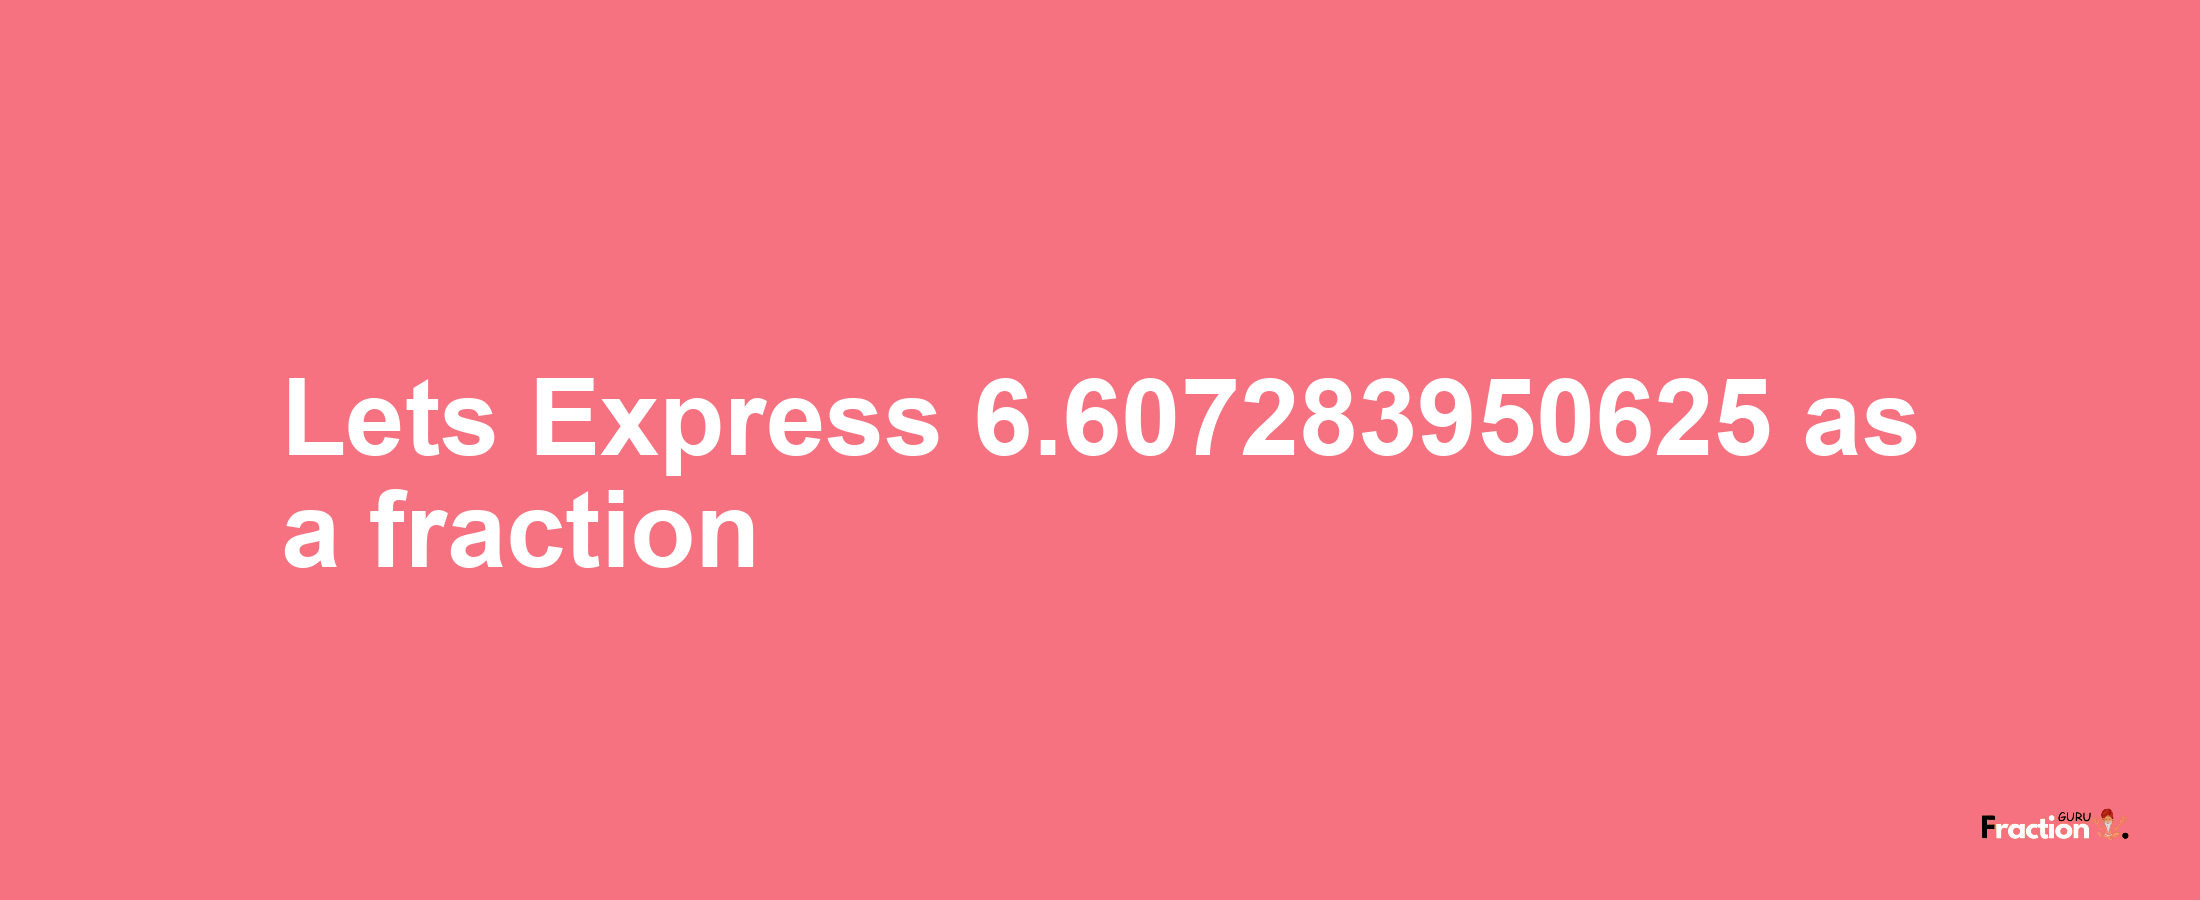 Lets Express 6.607283950625 as afraction